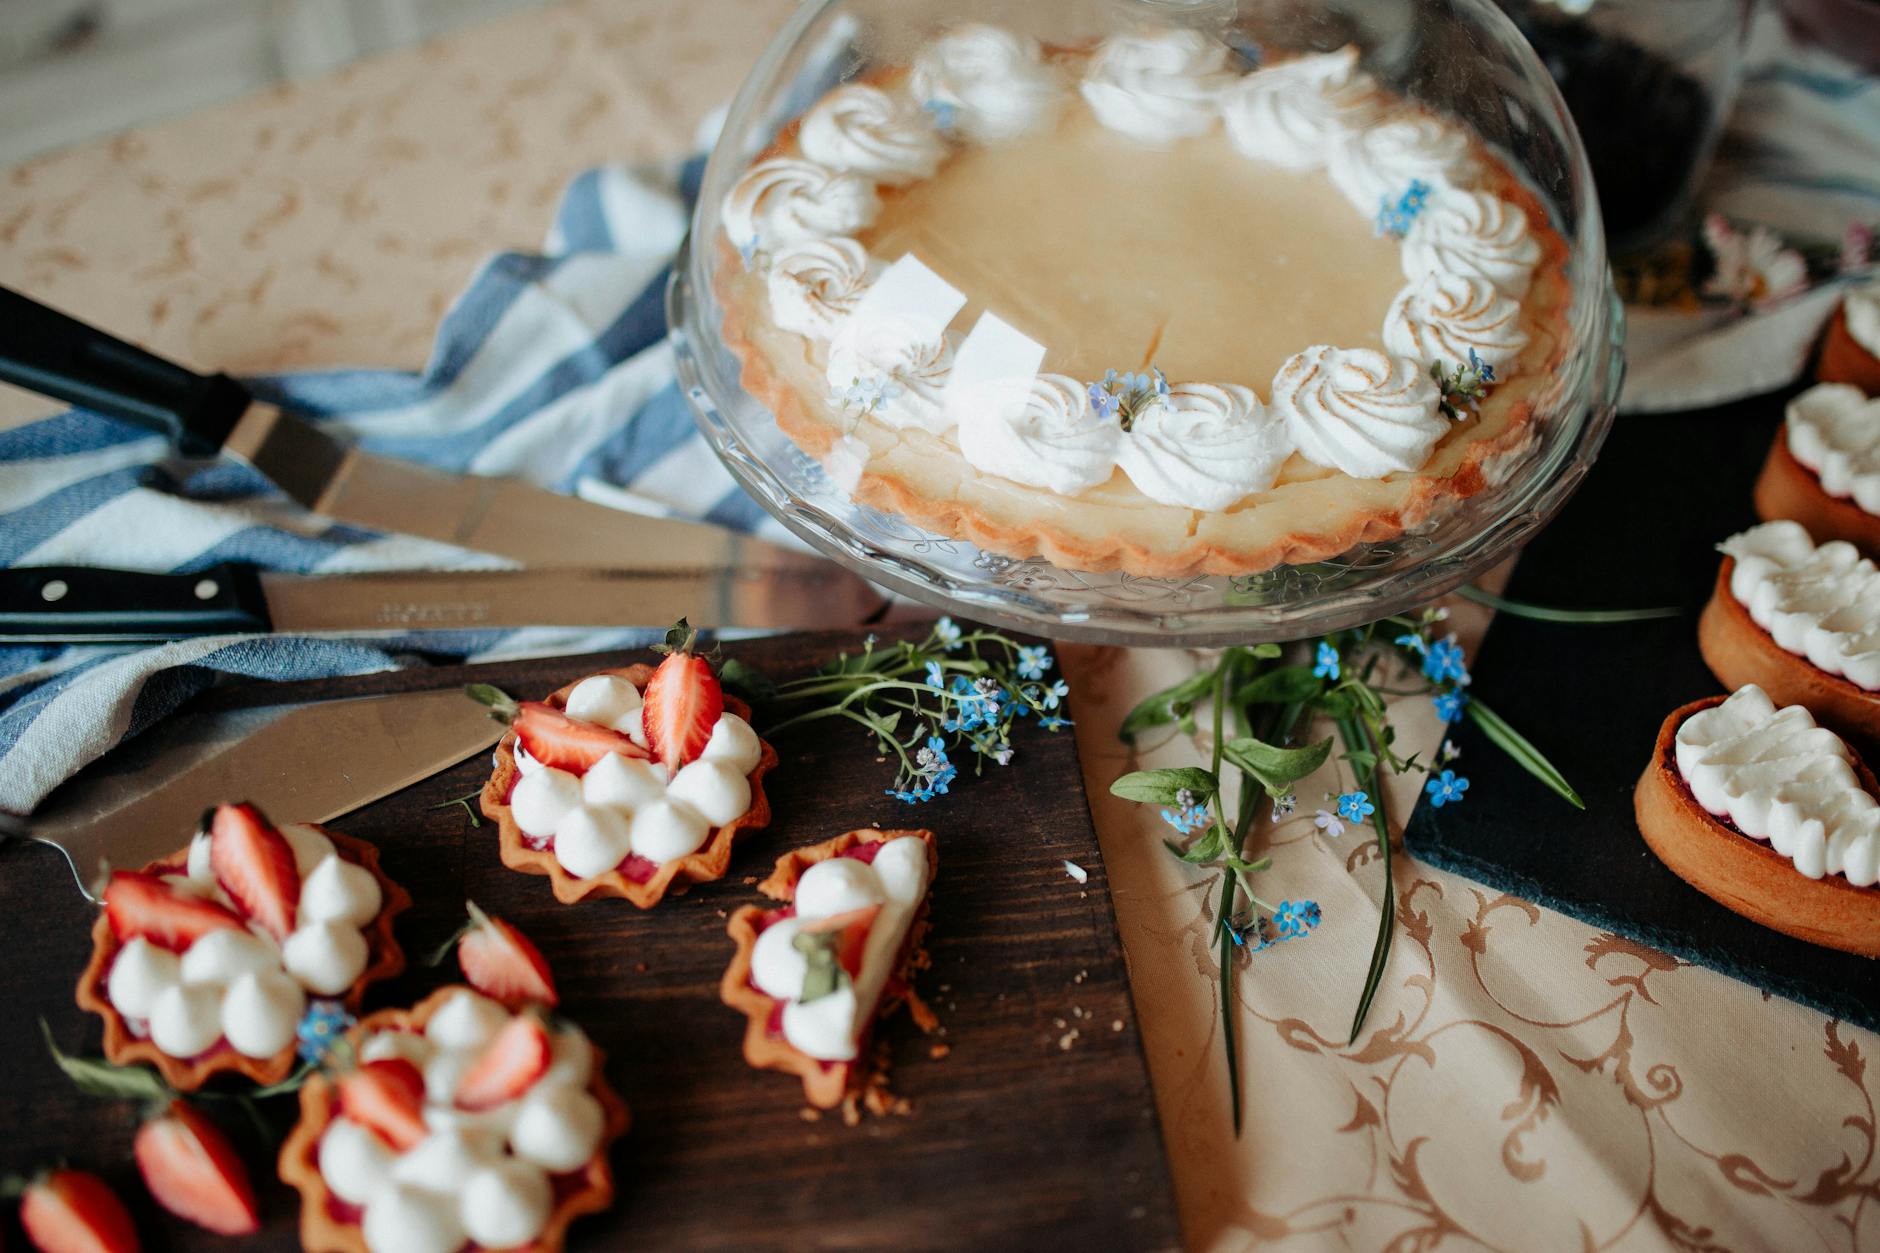 Pie decorated with cream on tray with glass cap near flowers and different desserts on cutting boards near knives on table in bright kitchen